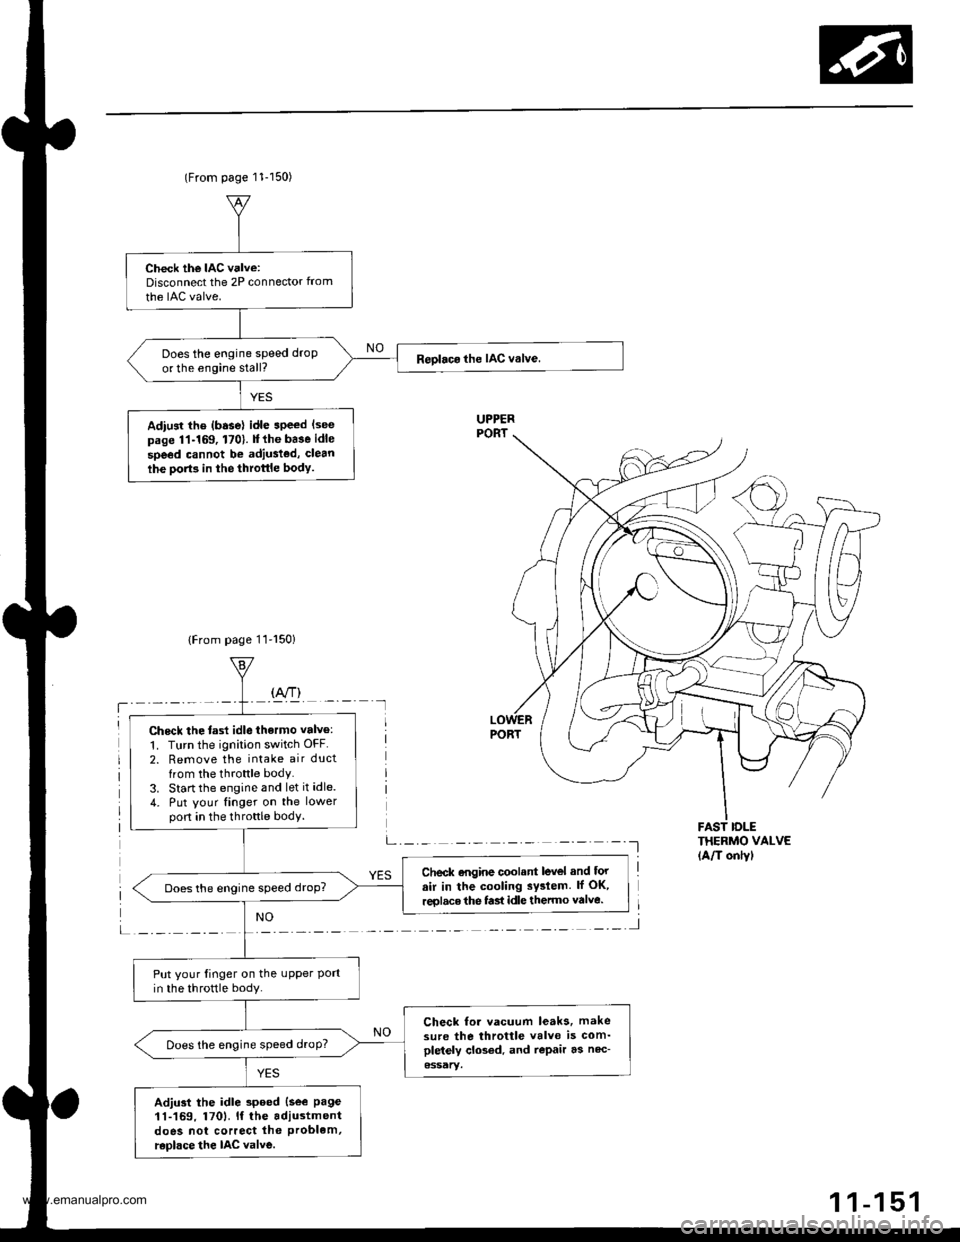 HONDA CR-V 1998 RD1-RD3 / 1.G Workshop Manual 
(From page 11-150)
{From page 11-150}
THERMO VALVE(A/T onlyl
Check the IAC valve:Disconnect the 2P connector from
the IAC valve.
Does the engine speed droP
or the engine stall?
Adiust the (basel idl�